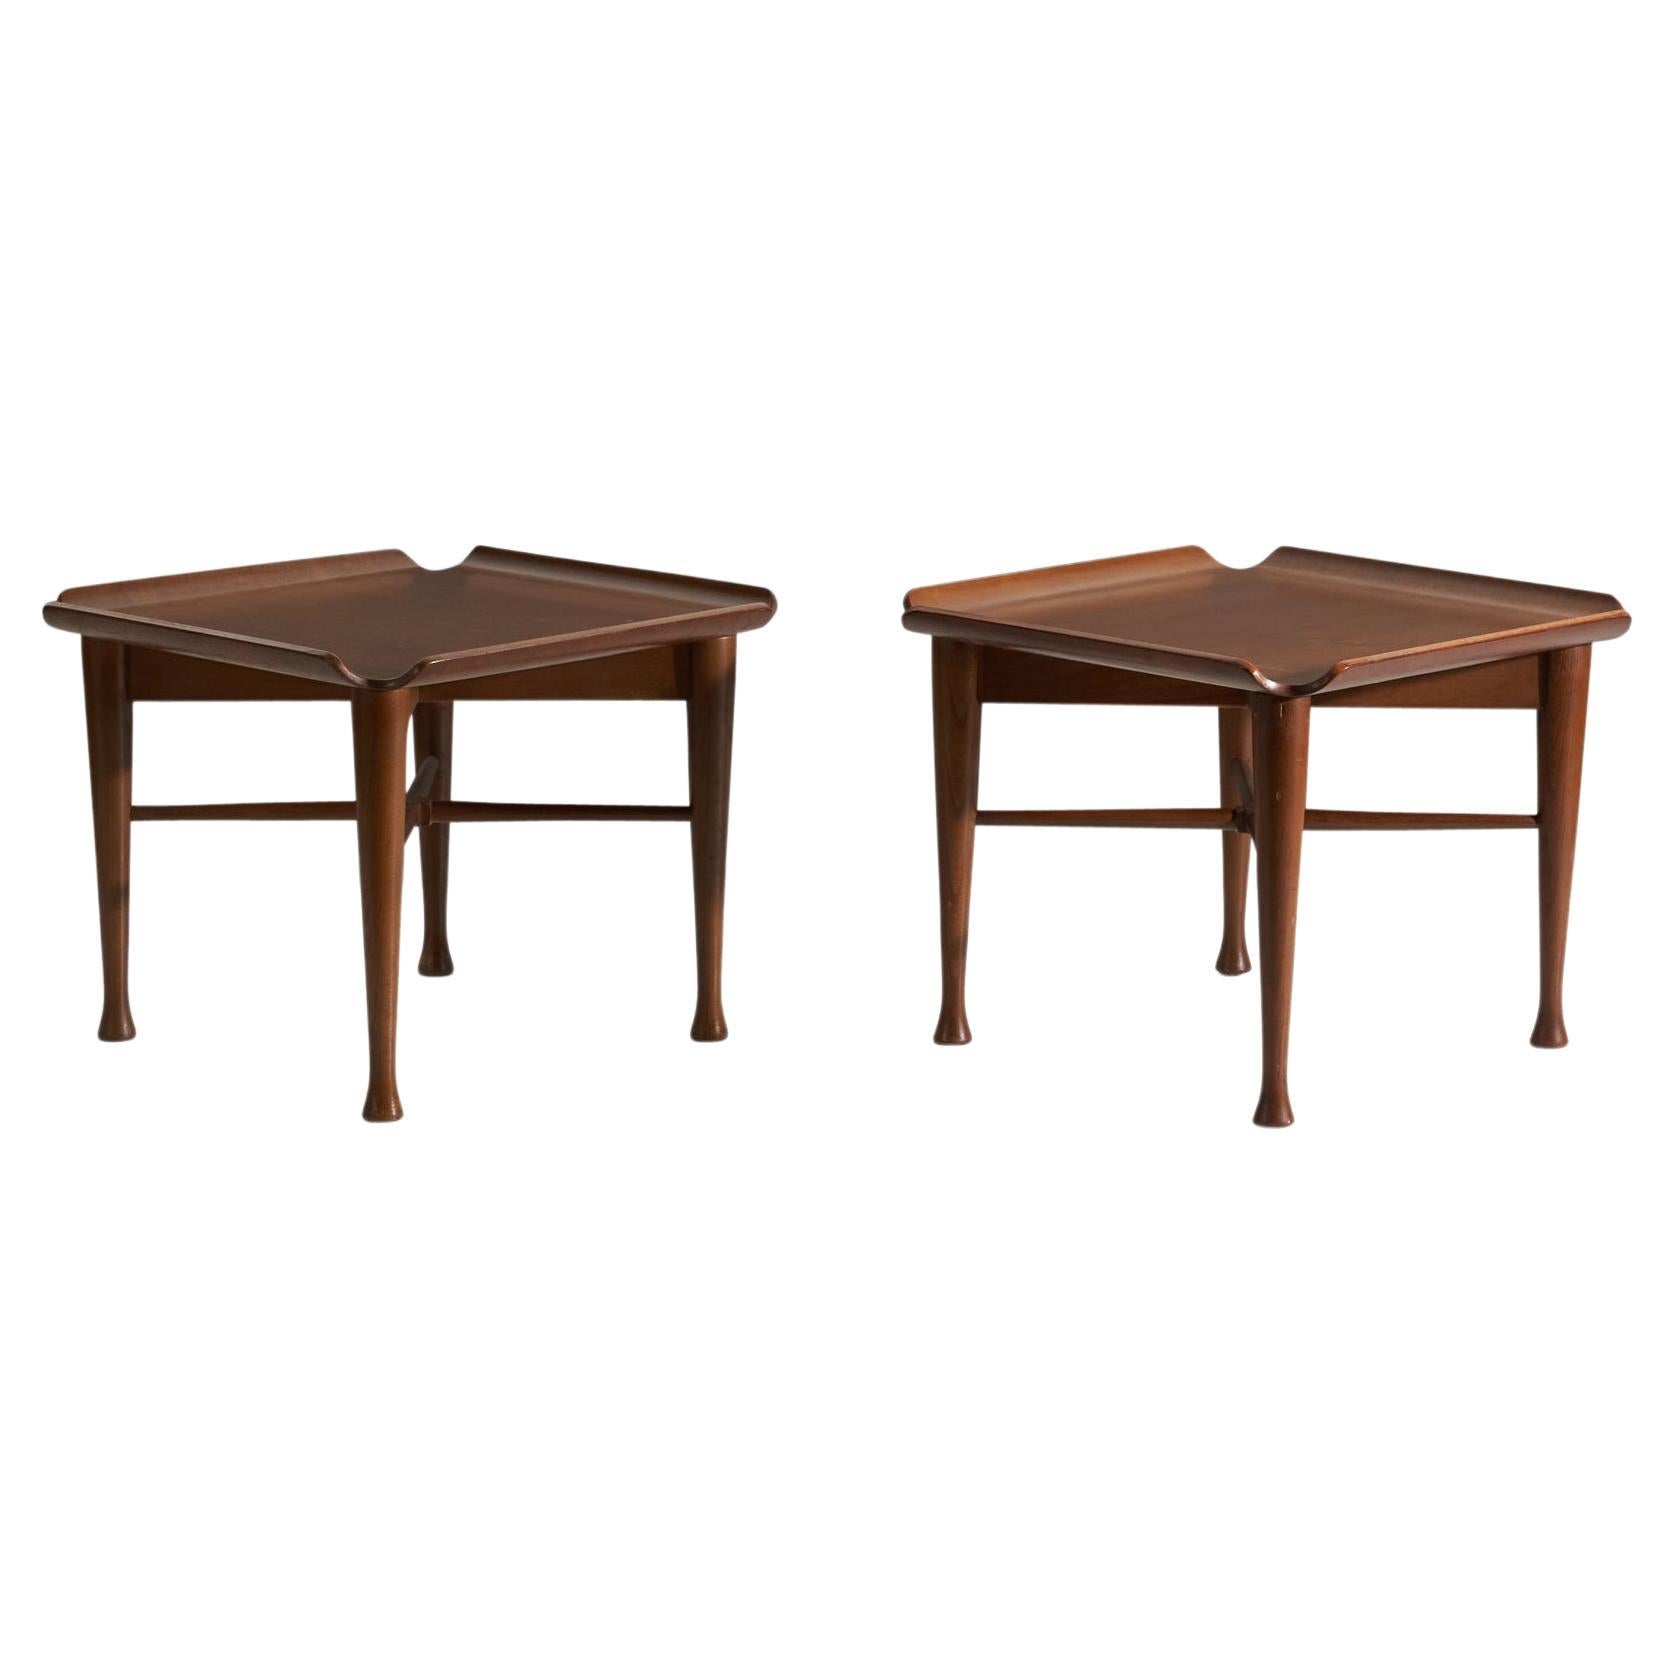 A pair of solid walnut and molded walnut plywood side tables/end tables, designed by Lawrence Peabody for Richardson Nemschoff, United States, 1960s.
 